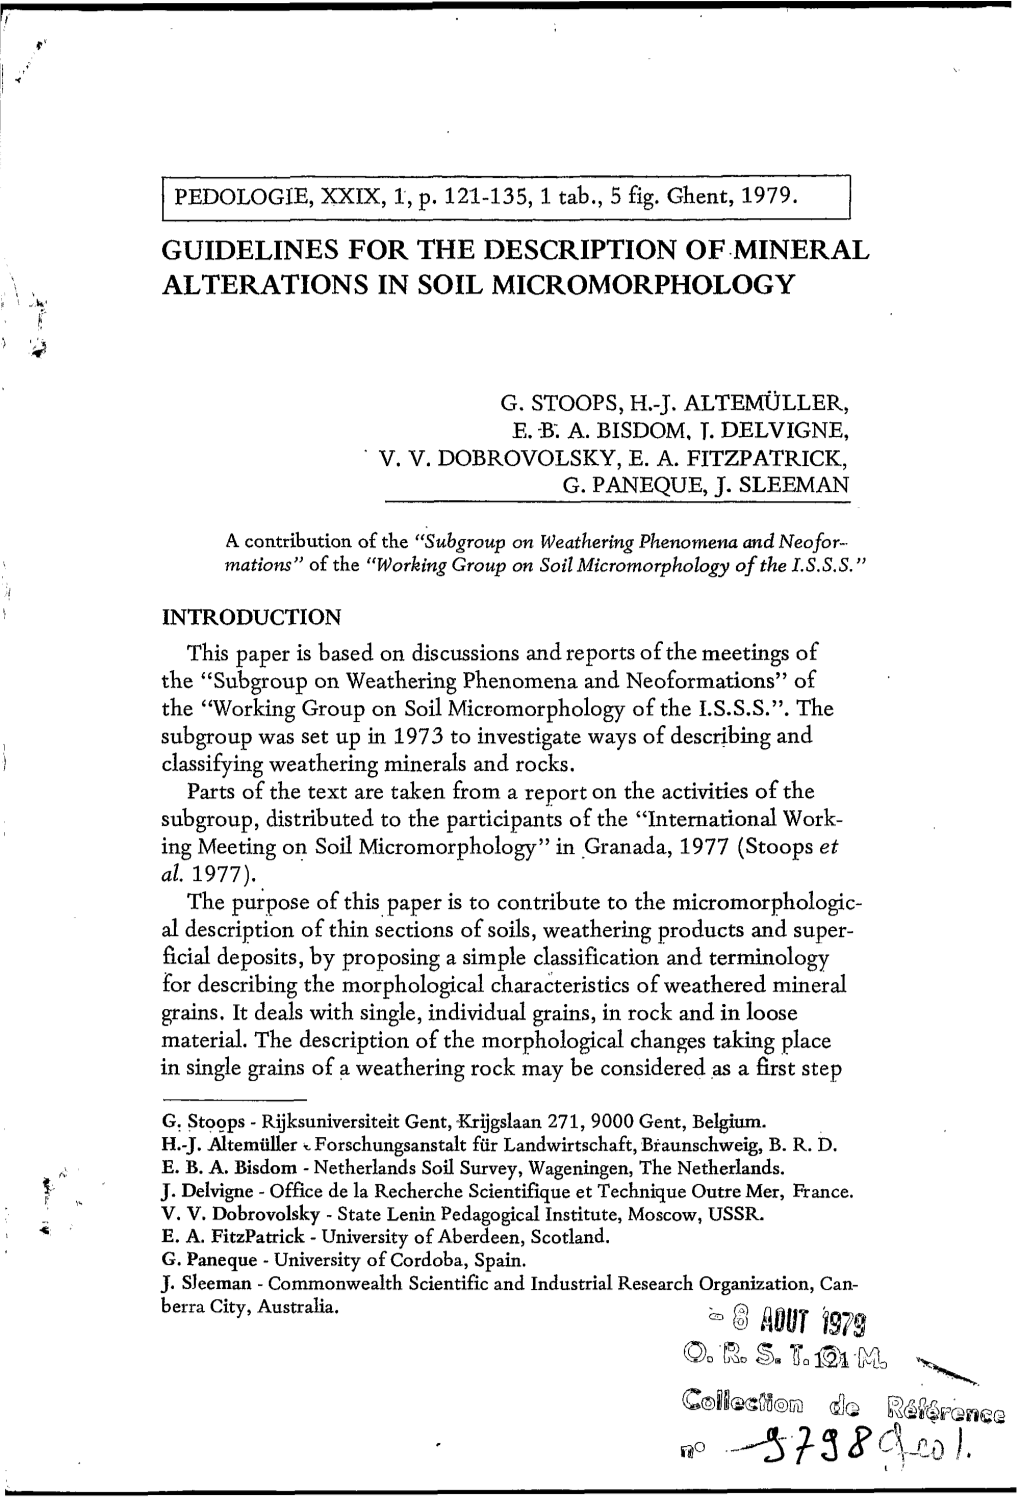 Guidelines for Description of Mineral Alterations in Soil Micromorphology